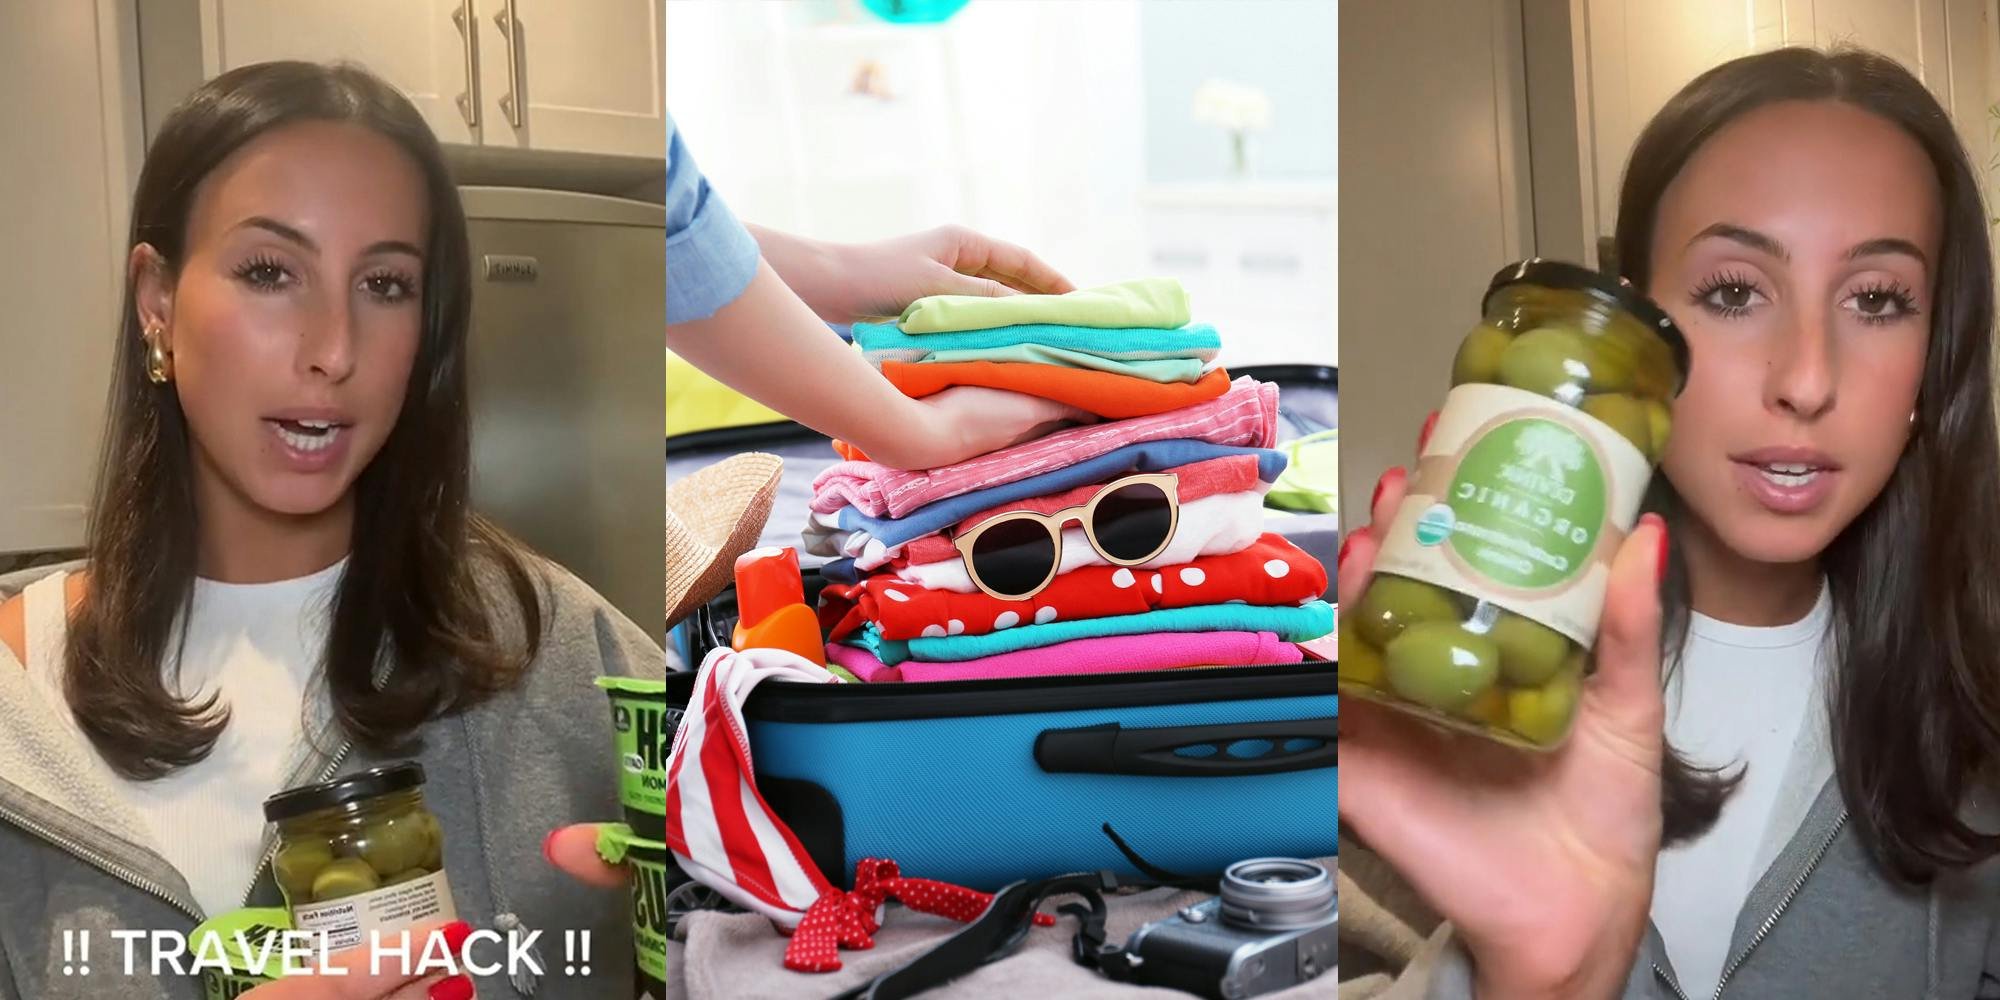 'I am most definitely going to bring things that are over 3 ounces of liquid': Traveler shares 'hack' TSA agent taught her to get liquids on a plane